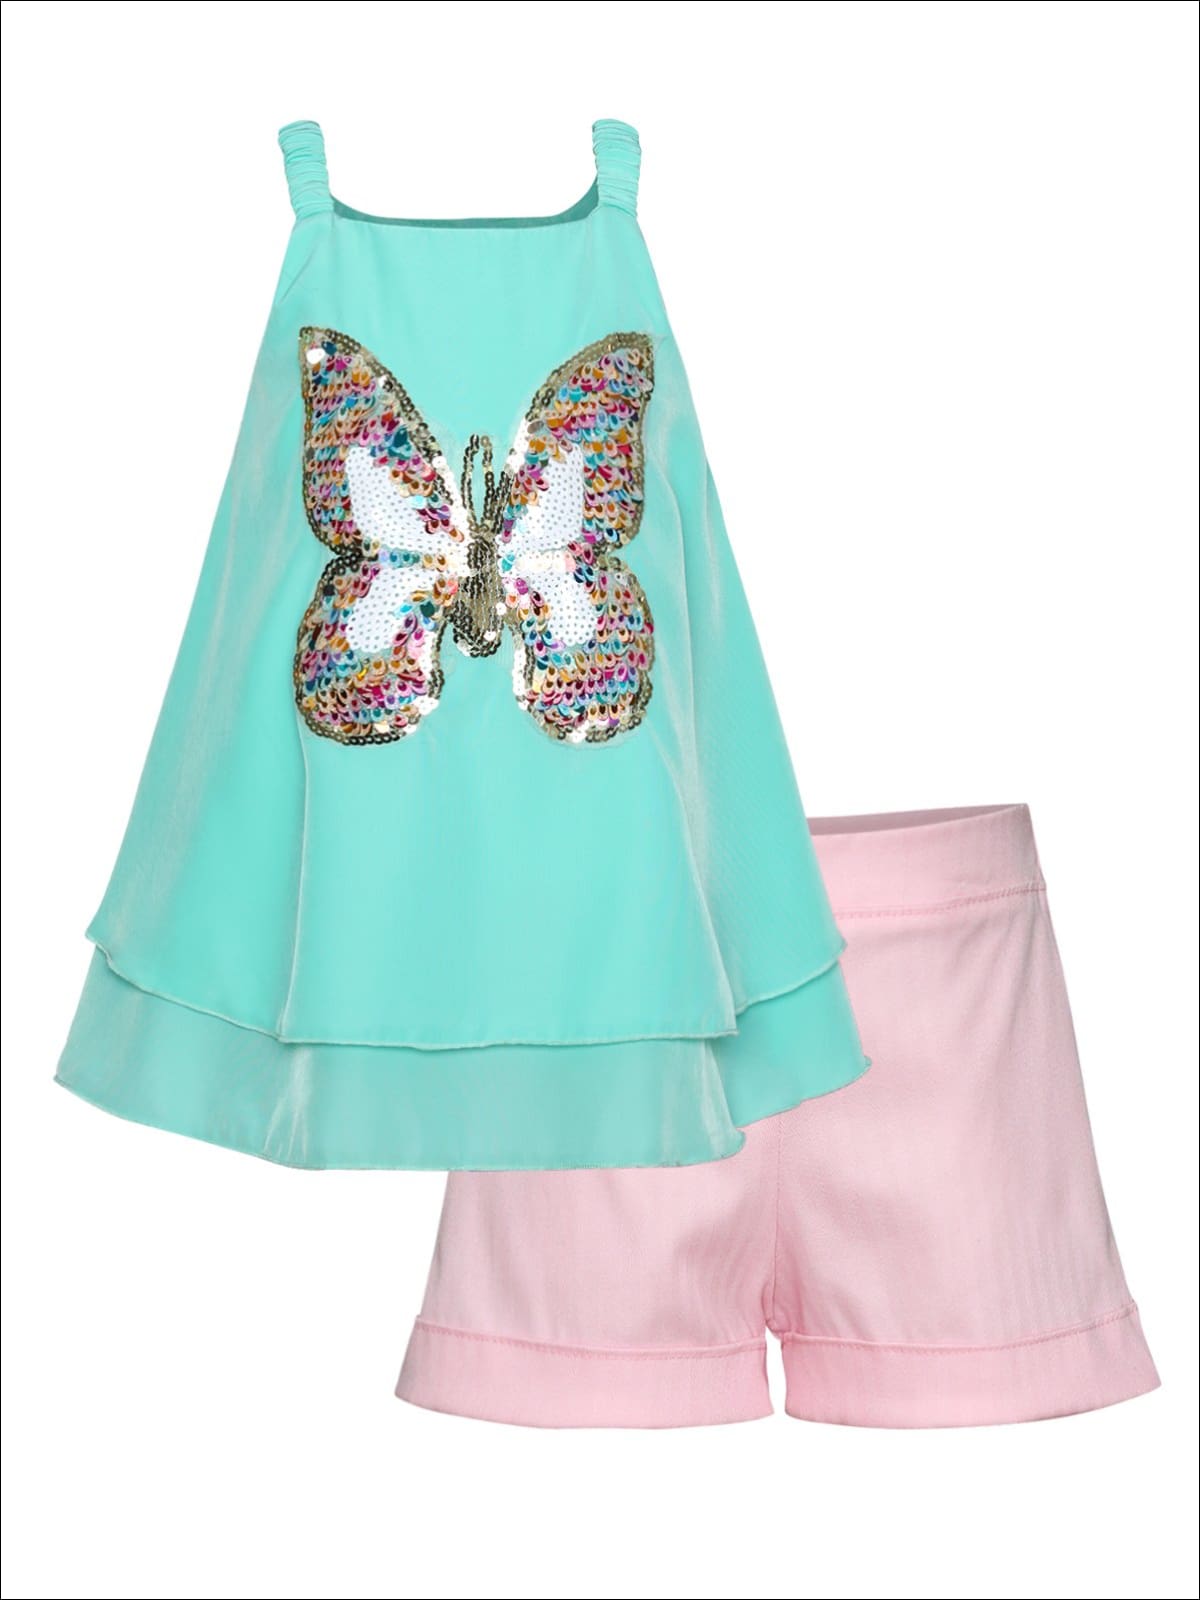 Girls Trimmed Double Layer Swing Tunic & Cuffed Bow Short Set - Multicolor / 2T/3T - Girls Spring Dressy Set